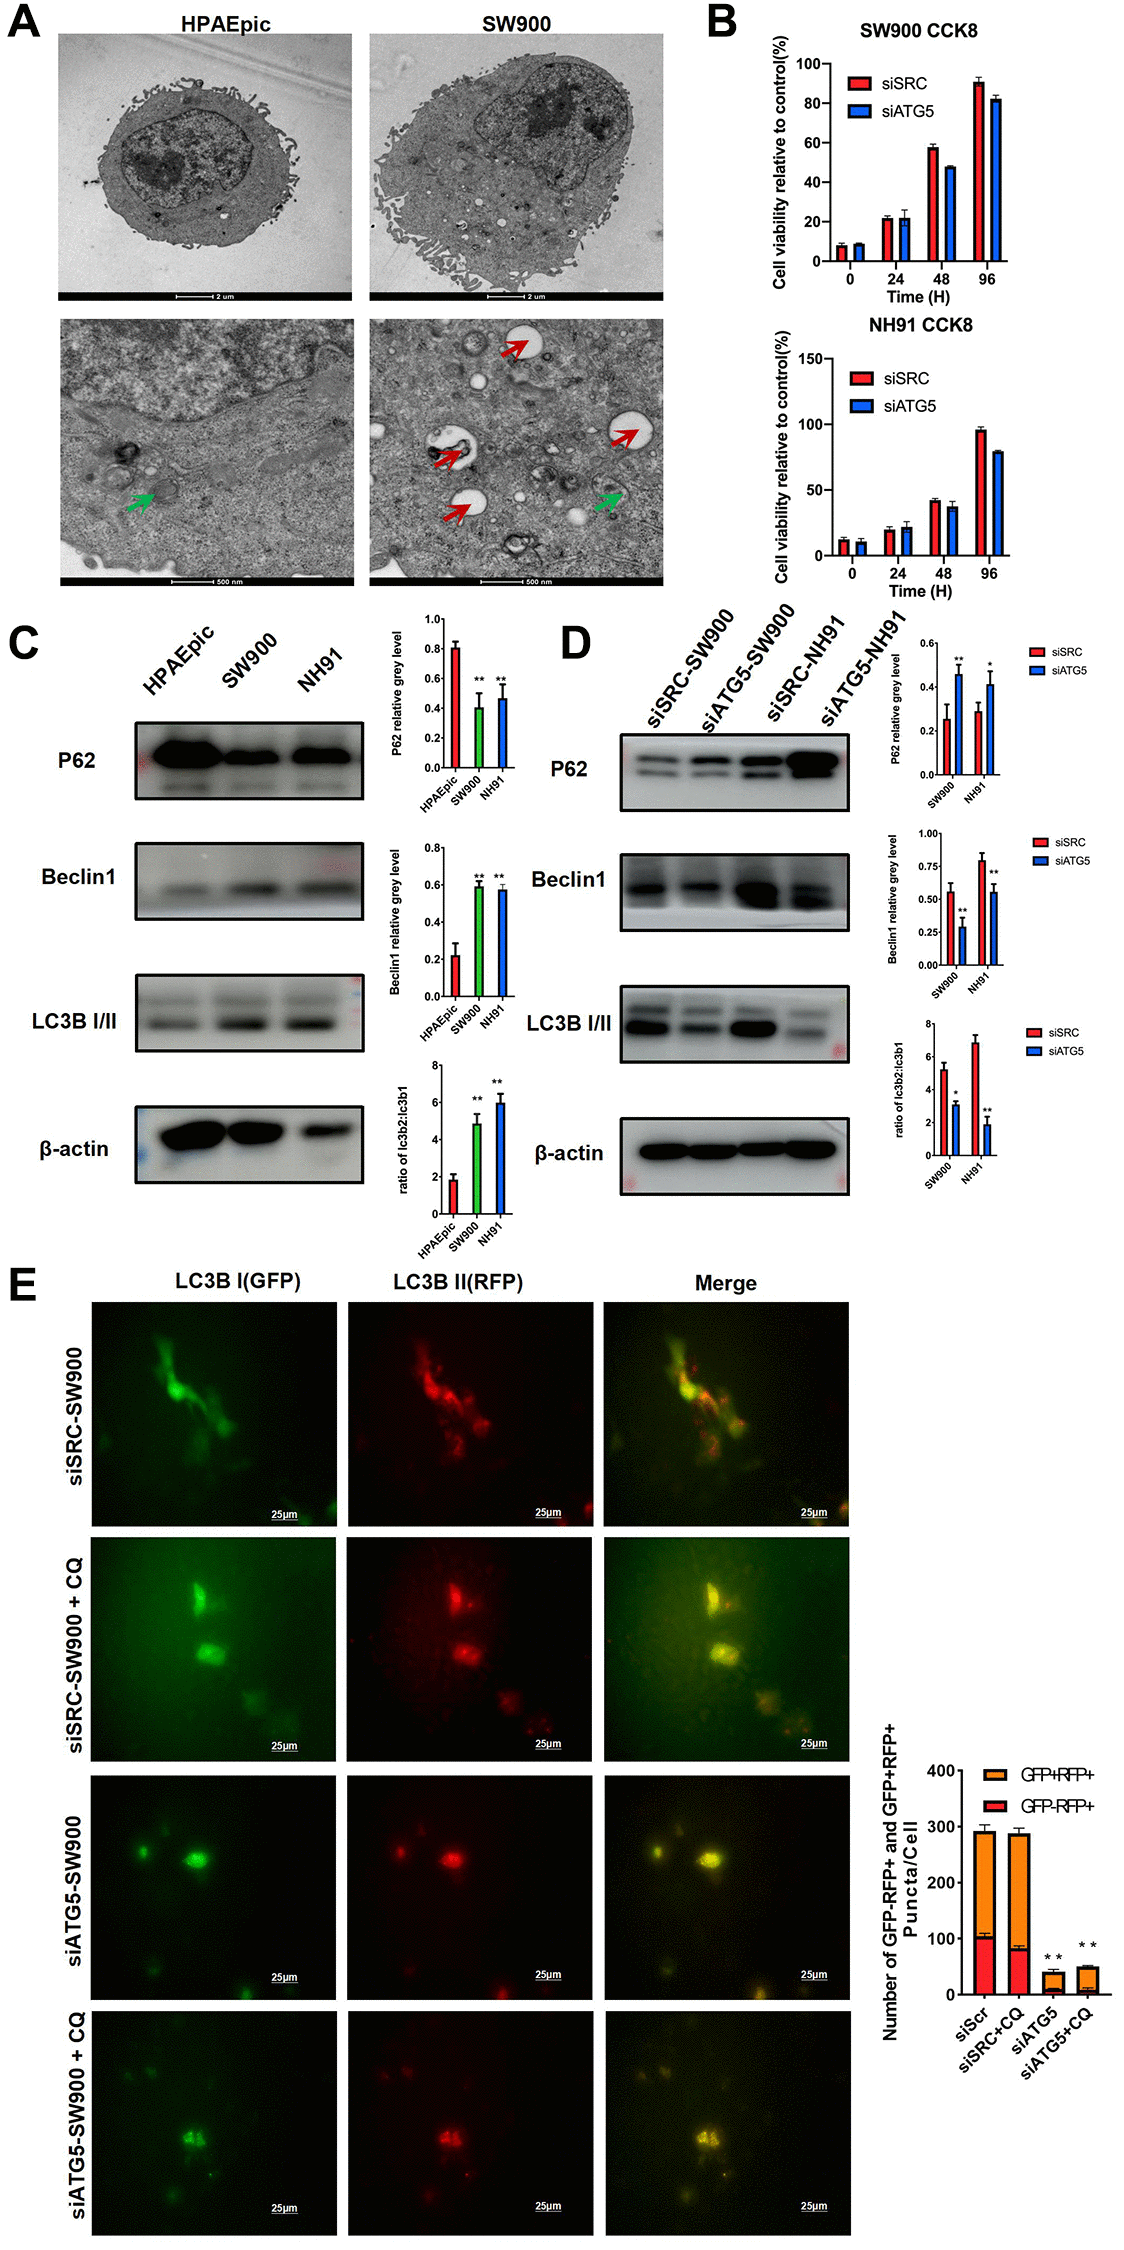 ATG5 down regulation inhibits autophagy in LUSC cells. (A) Representative TEM images showing the formation of autophagosomes (red arrow) and autolysosomes (green arrow) in HPAEpic and SW900. (B) After the transfected with siATG5/SRC, cell viability at different time points were assessed by using an MTT assay. (C) Expression of autophagy relative protein, including P62, Beclin1 and LC3B I/II, were evaluated in HPAEpic, SW900 and NH91cells. (D) Expression of ATG5, P62, Beclin 1, and LC3B I/II in SW900 and NH91 cells transfected with si-ATG5 were detected using a western blot assay. (E) siATG5 and siSRC SW900 cells were transfected with GFP-mRFP-LC3 virus and incubated with or without chloroquine for 24 h and then starved for 2 hours. Red or yellow puncta indicating complete/incomplete autophagy were calculated and reported as the mean ± SD. All the P values were compared with the control *P **P ***P 